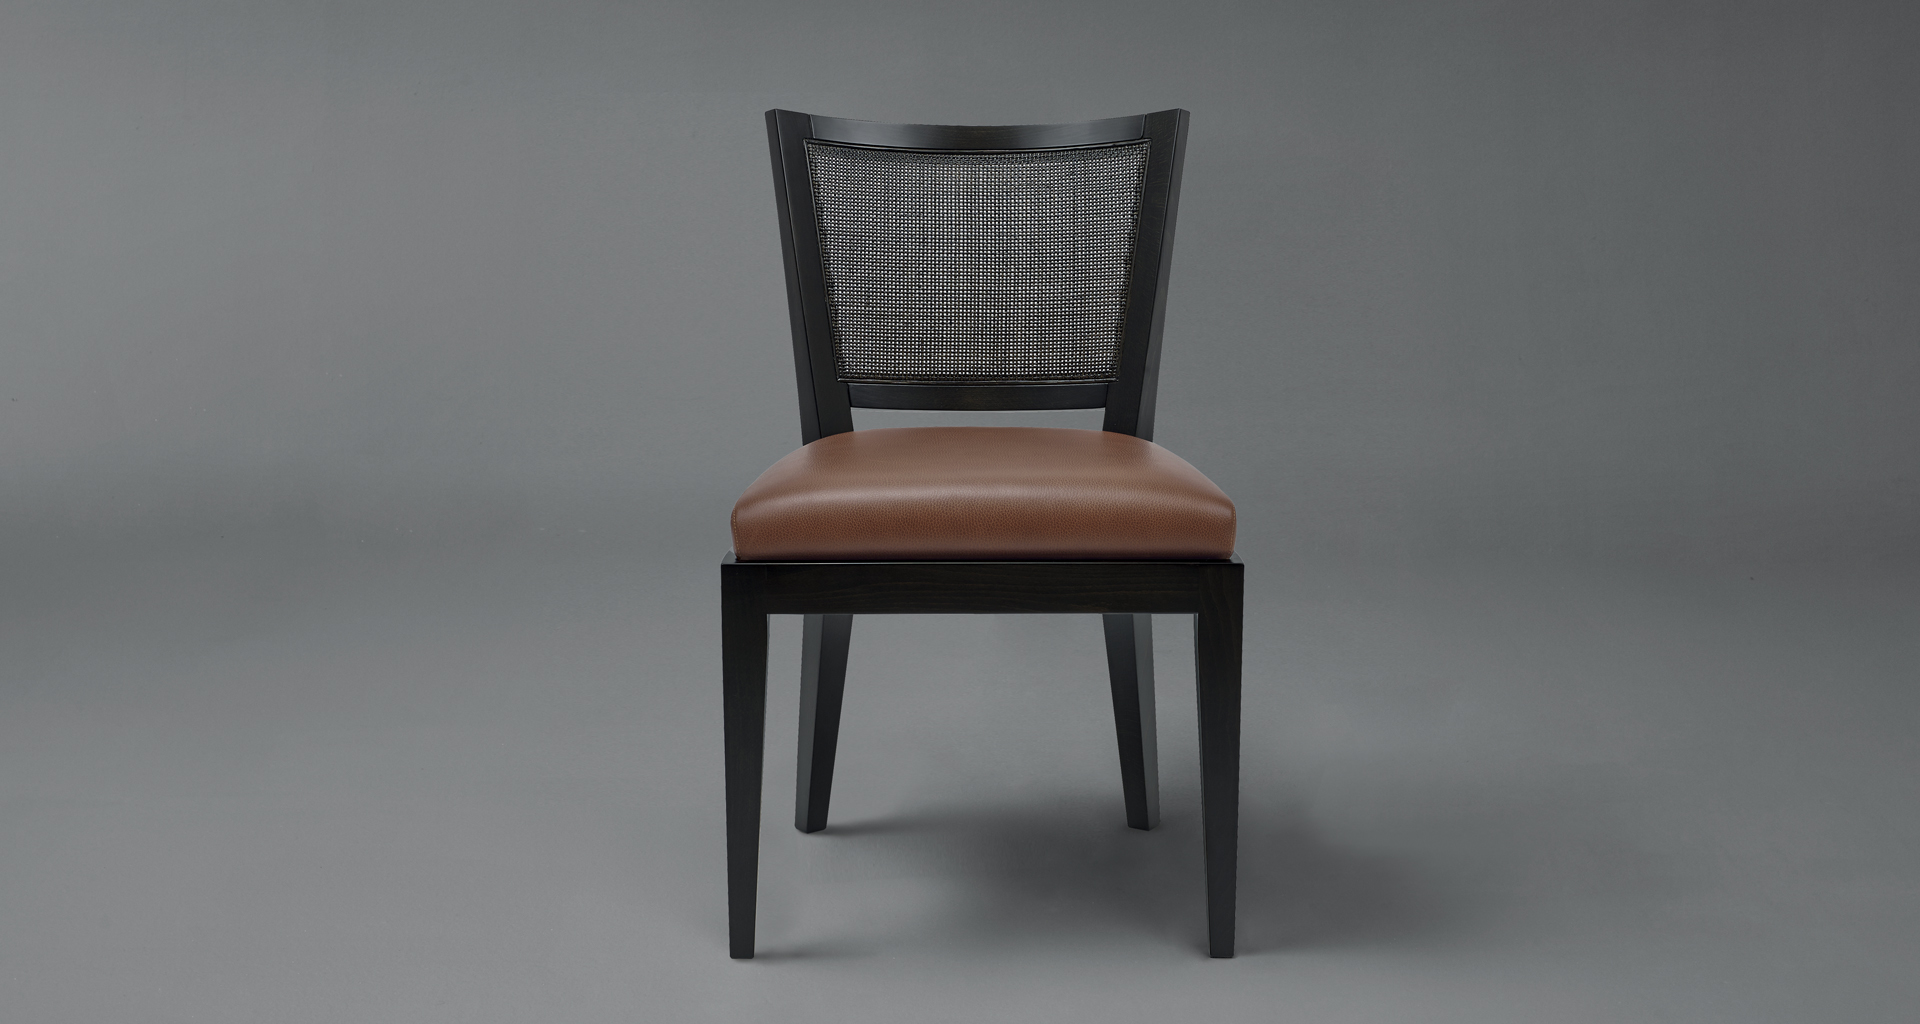 Caffè is a wooden dining chair, with straw backrest and fabric or leather seat, from Promemoria's catalogue | Promemoria